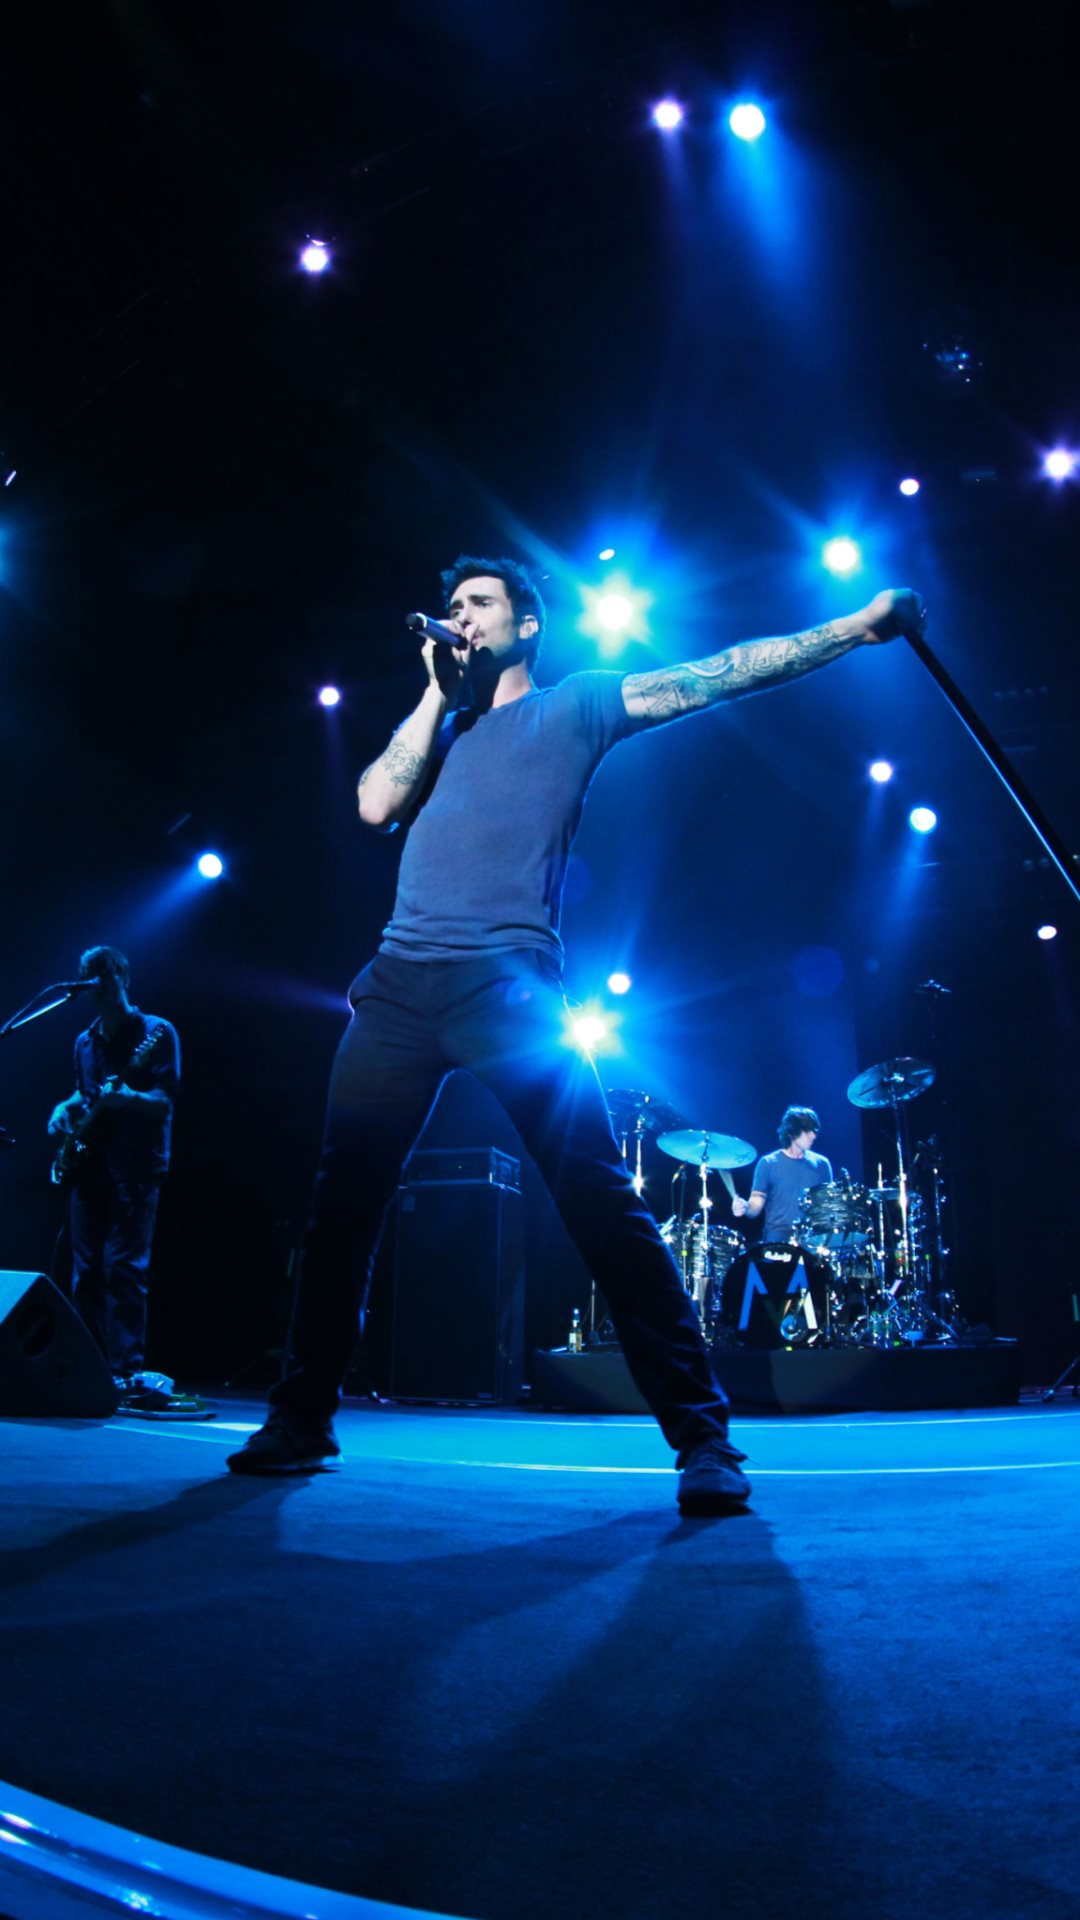 Maroon 5 in concert for Samsung Galaxy and iPhone: 1080x1920